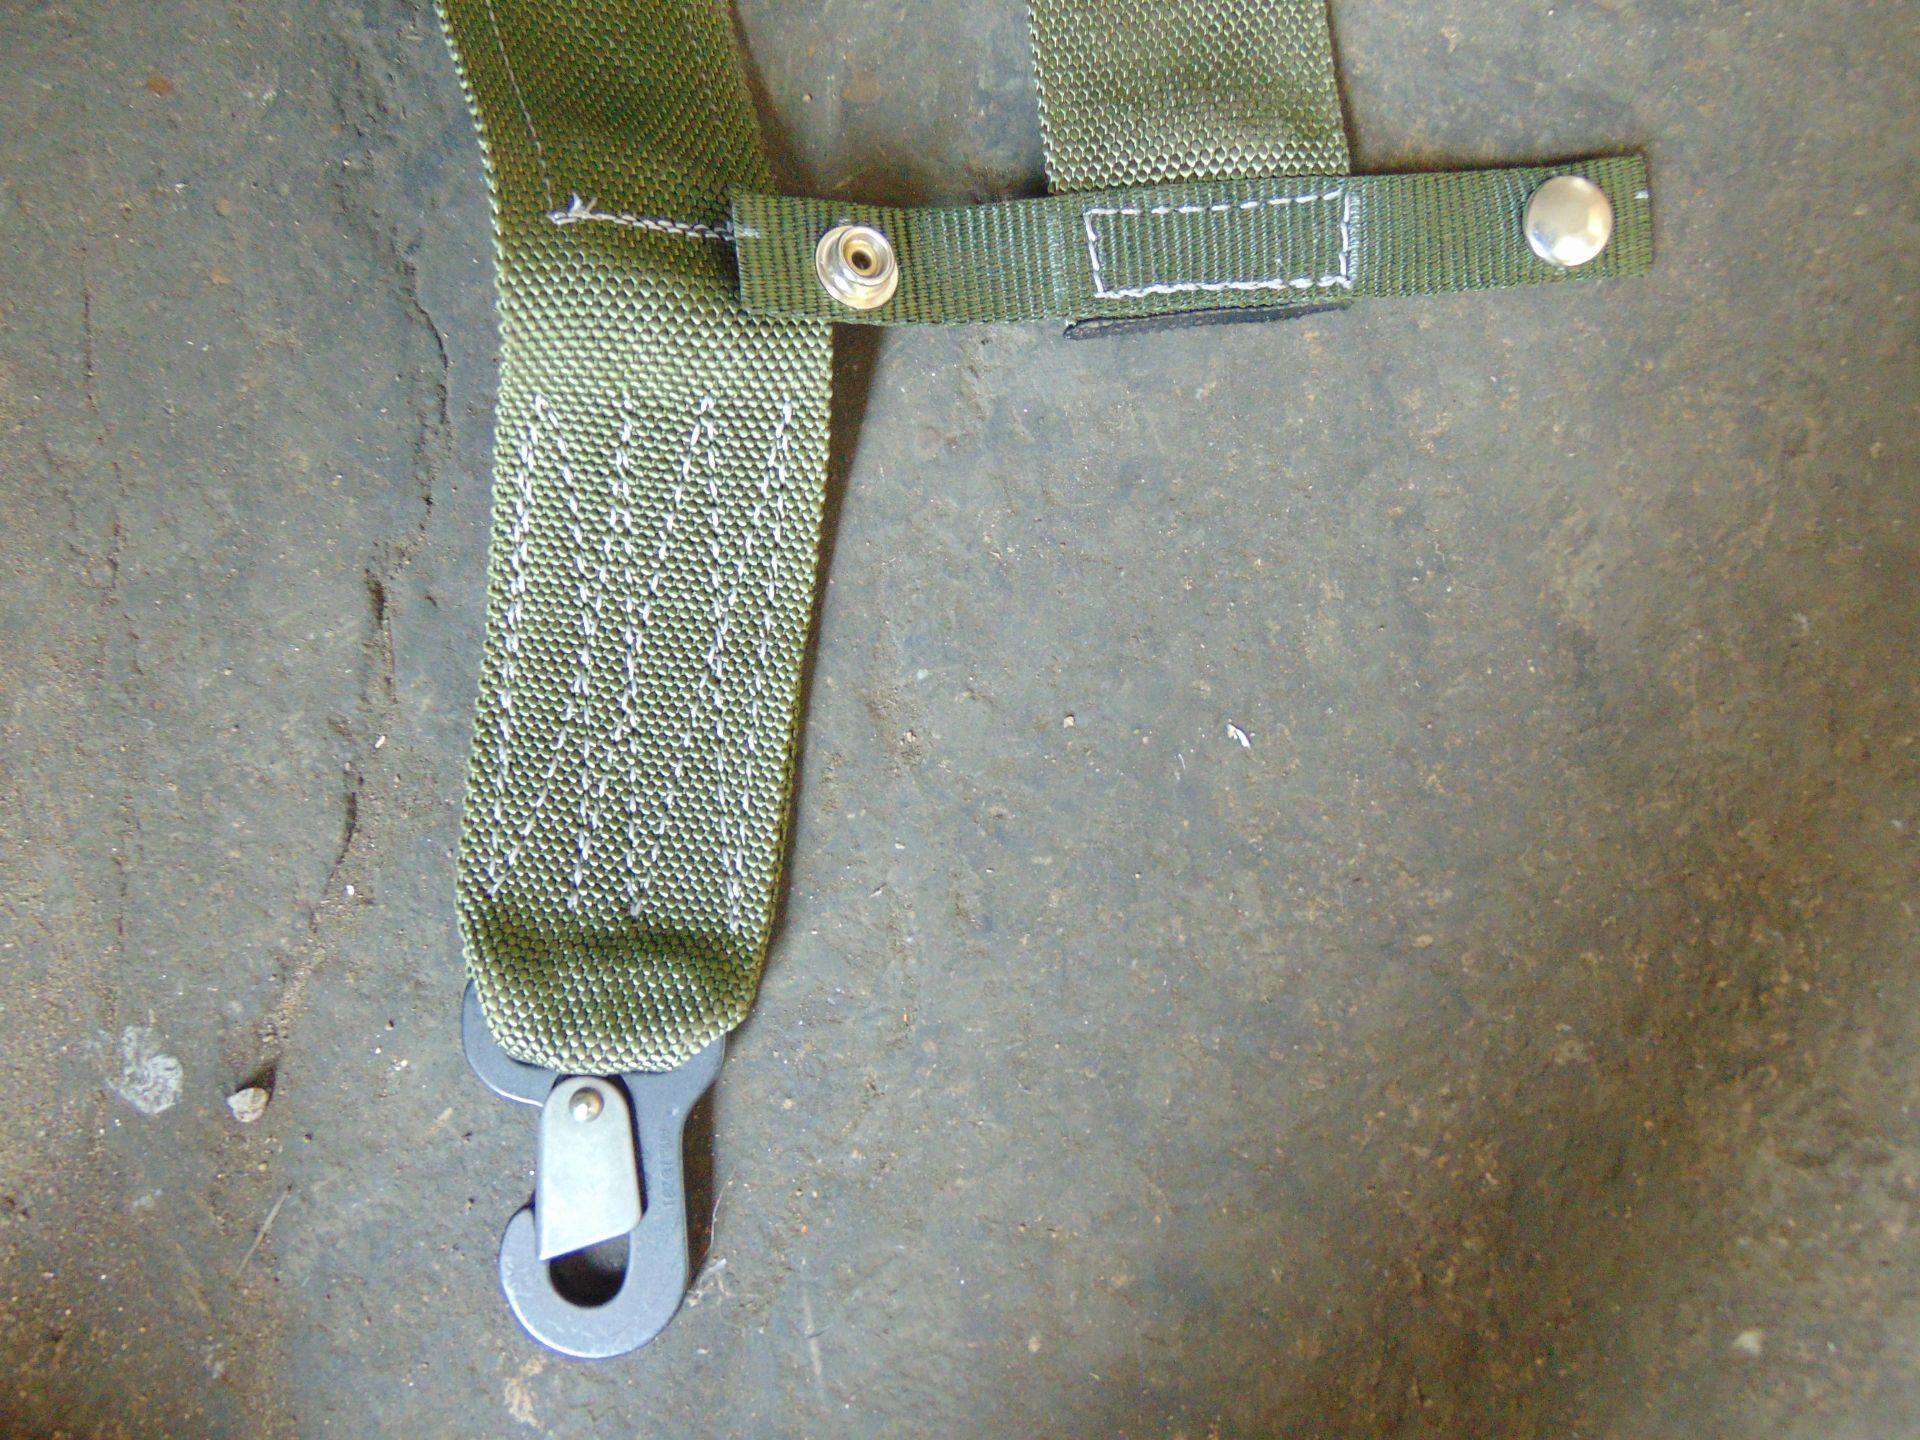 10 x Airborne Systems Ltd Casualty Saftey Harnesses - Image 5 of 7